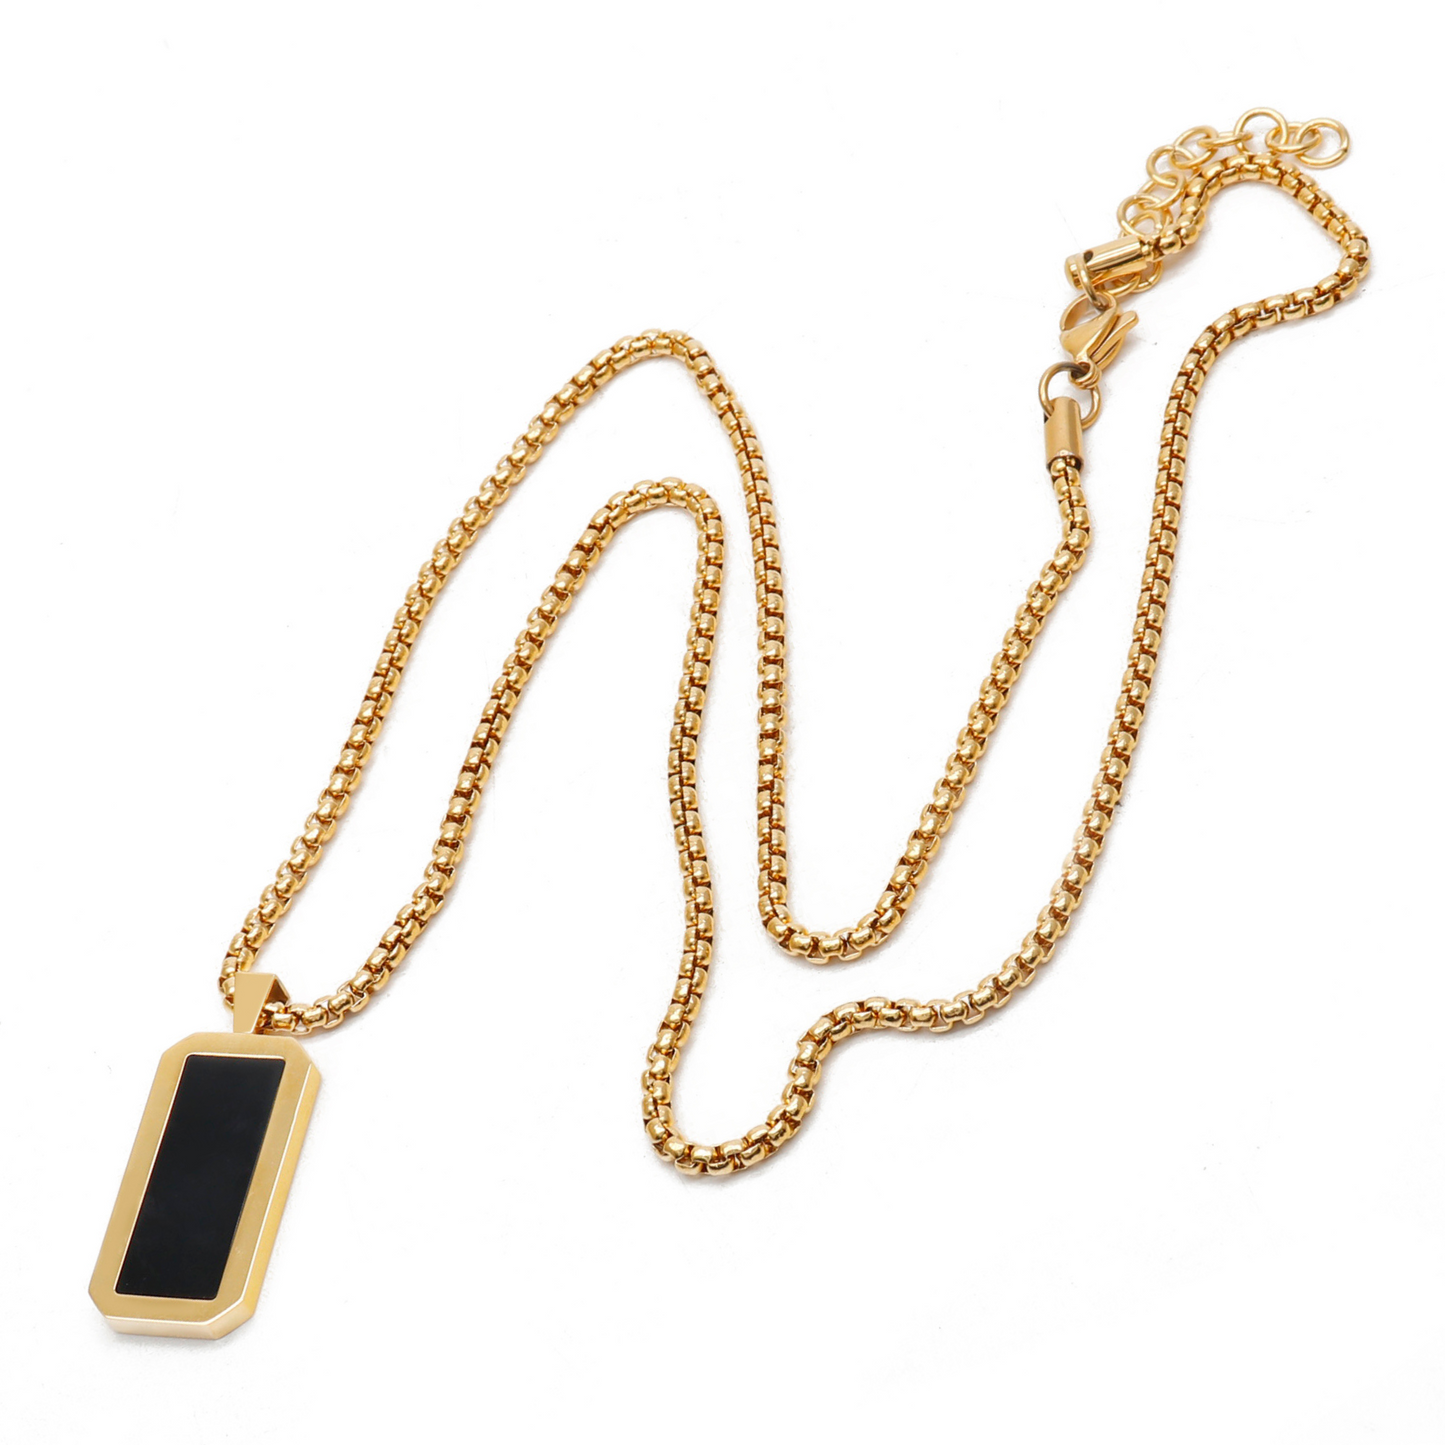 Golden Necklace with Rectangle Onyx Pendant